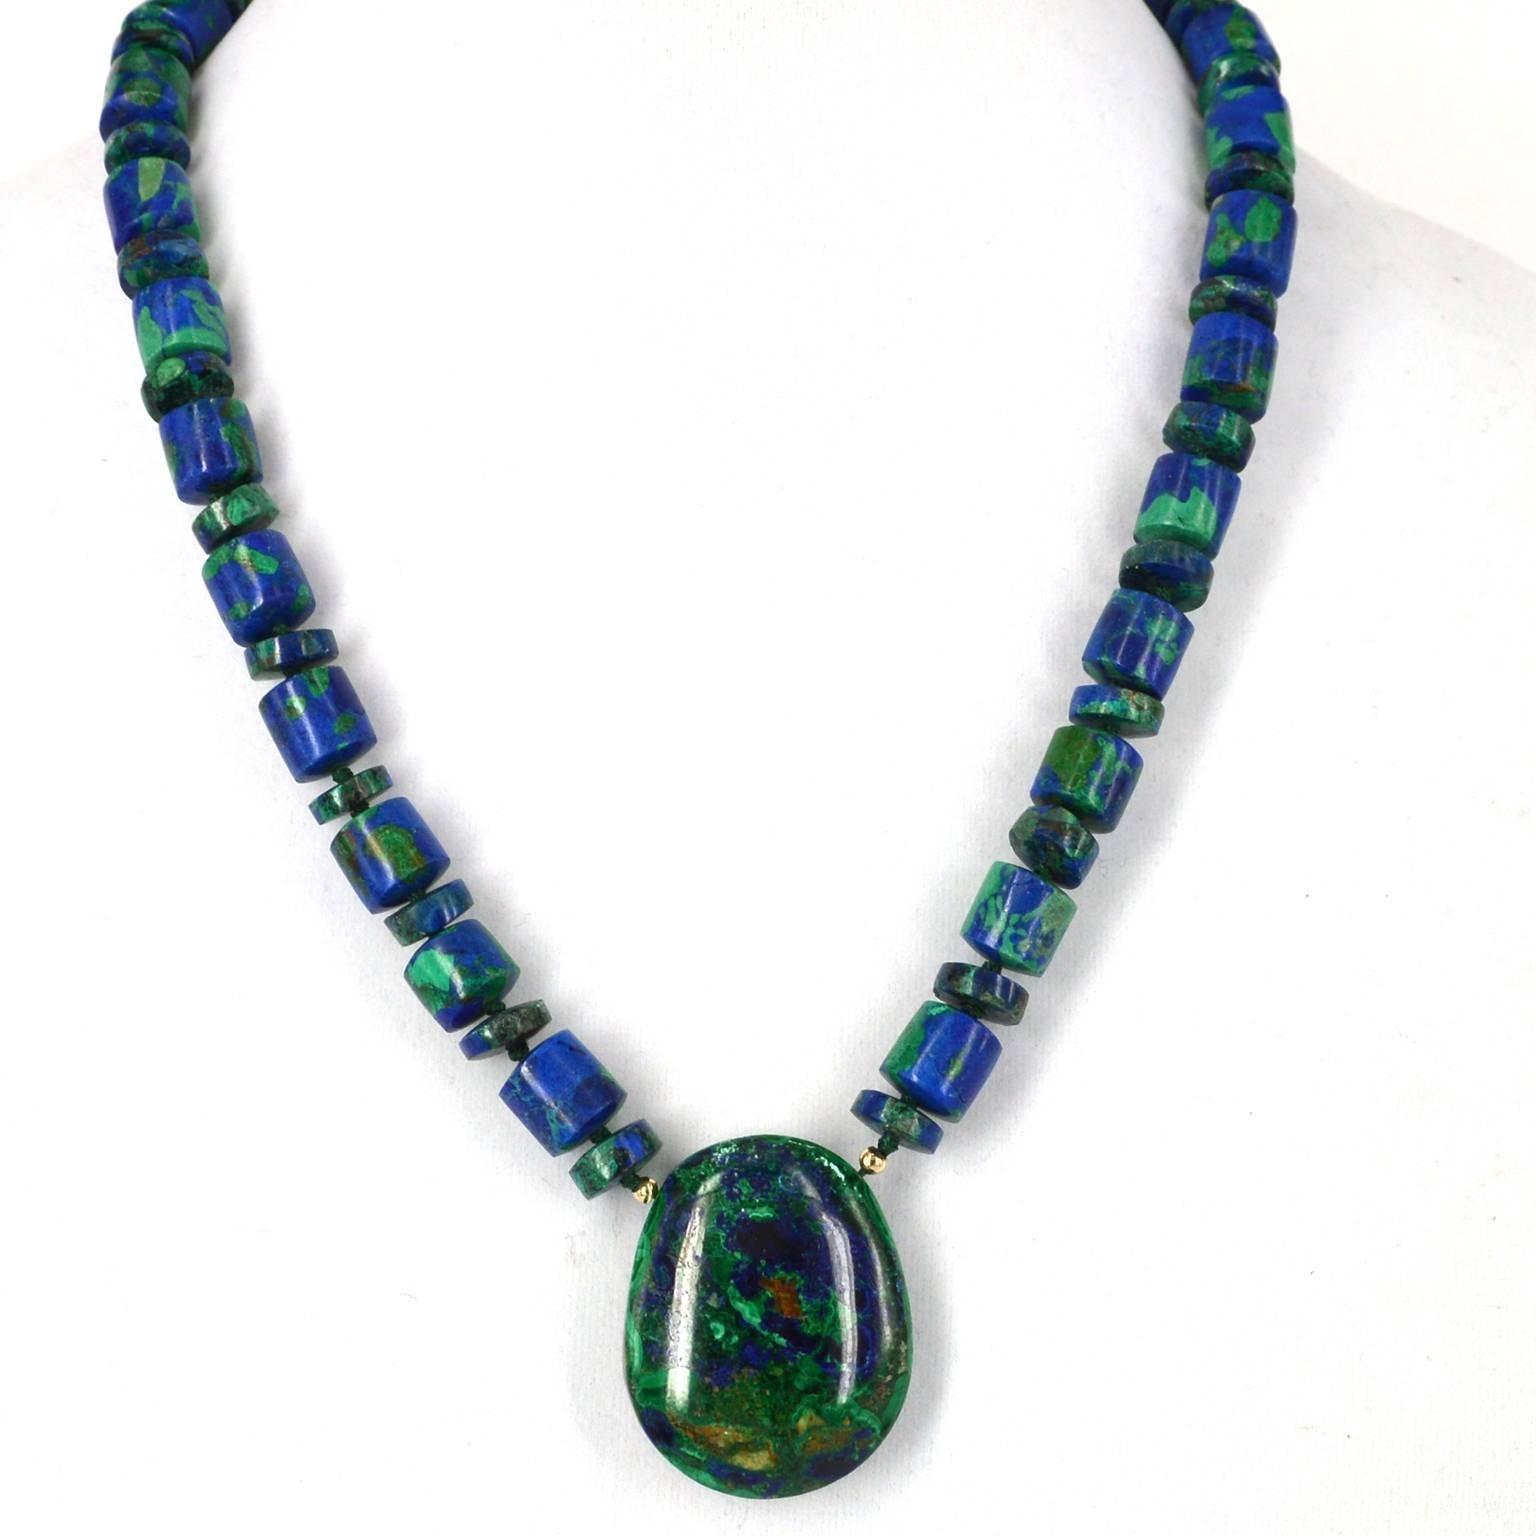 Azurite is the mingling of blue Lapis Lazuli and green Malachite and make this a stunning necklace. The main beads have been stabilised to strengthen the bead, the pendant stone has been polished only. Azurite beads are 10mm wide and the pendant is